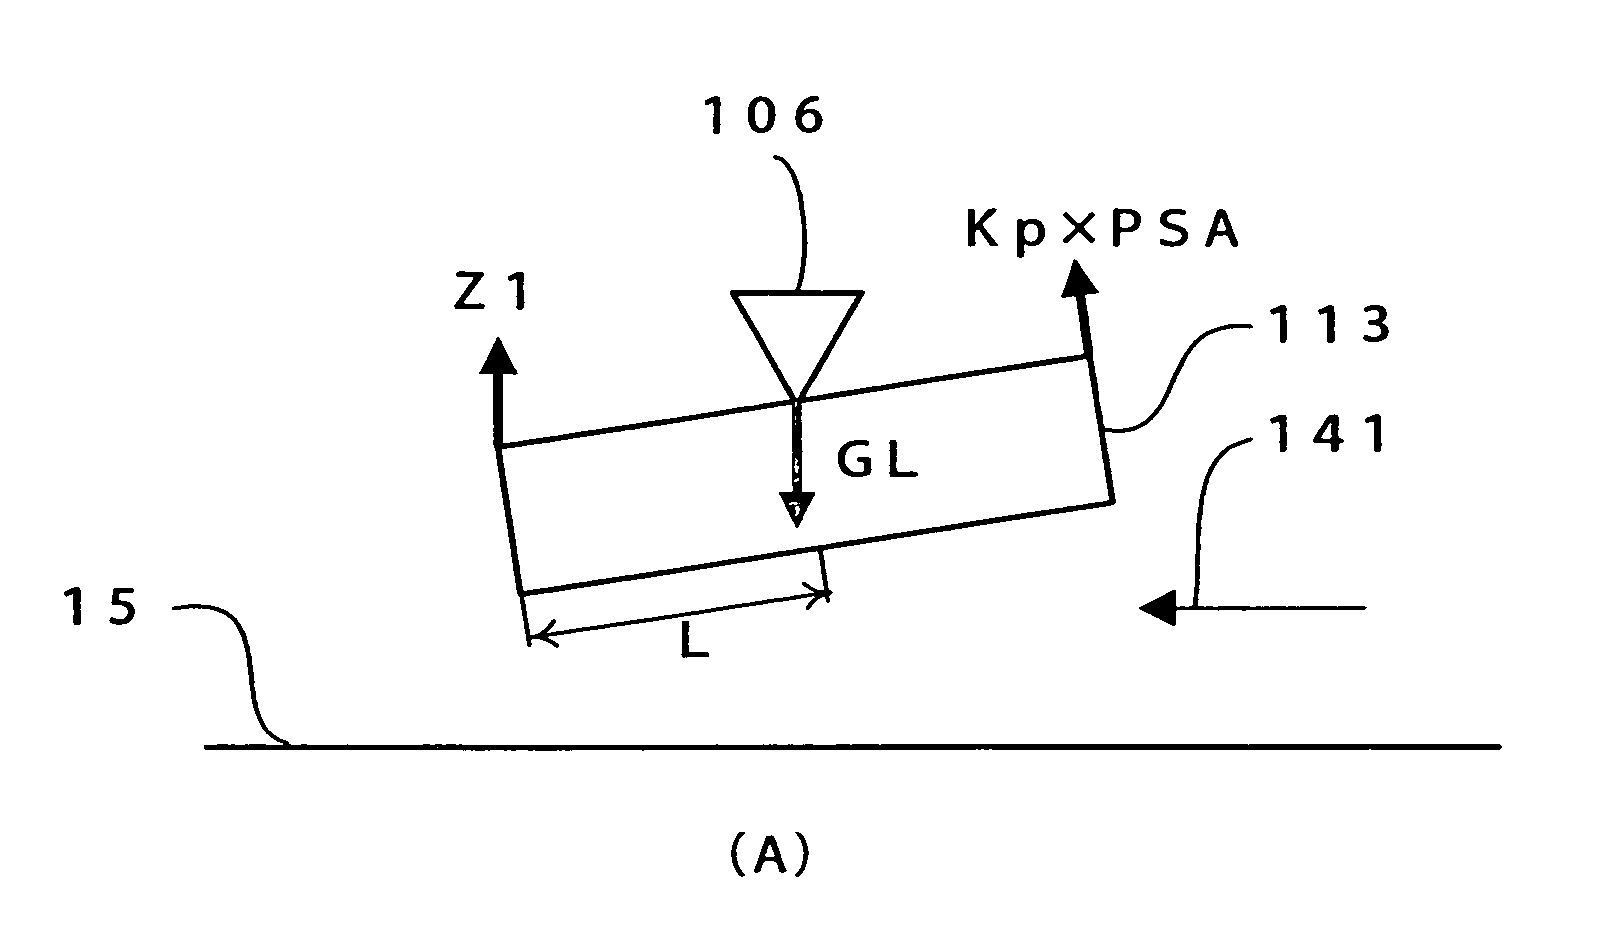 Magnetic disk drive using femto slider and having predetermined linear velocity and gram load configuration